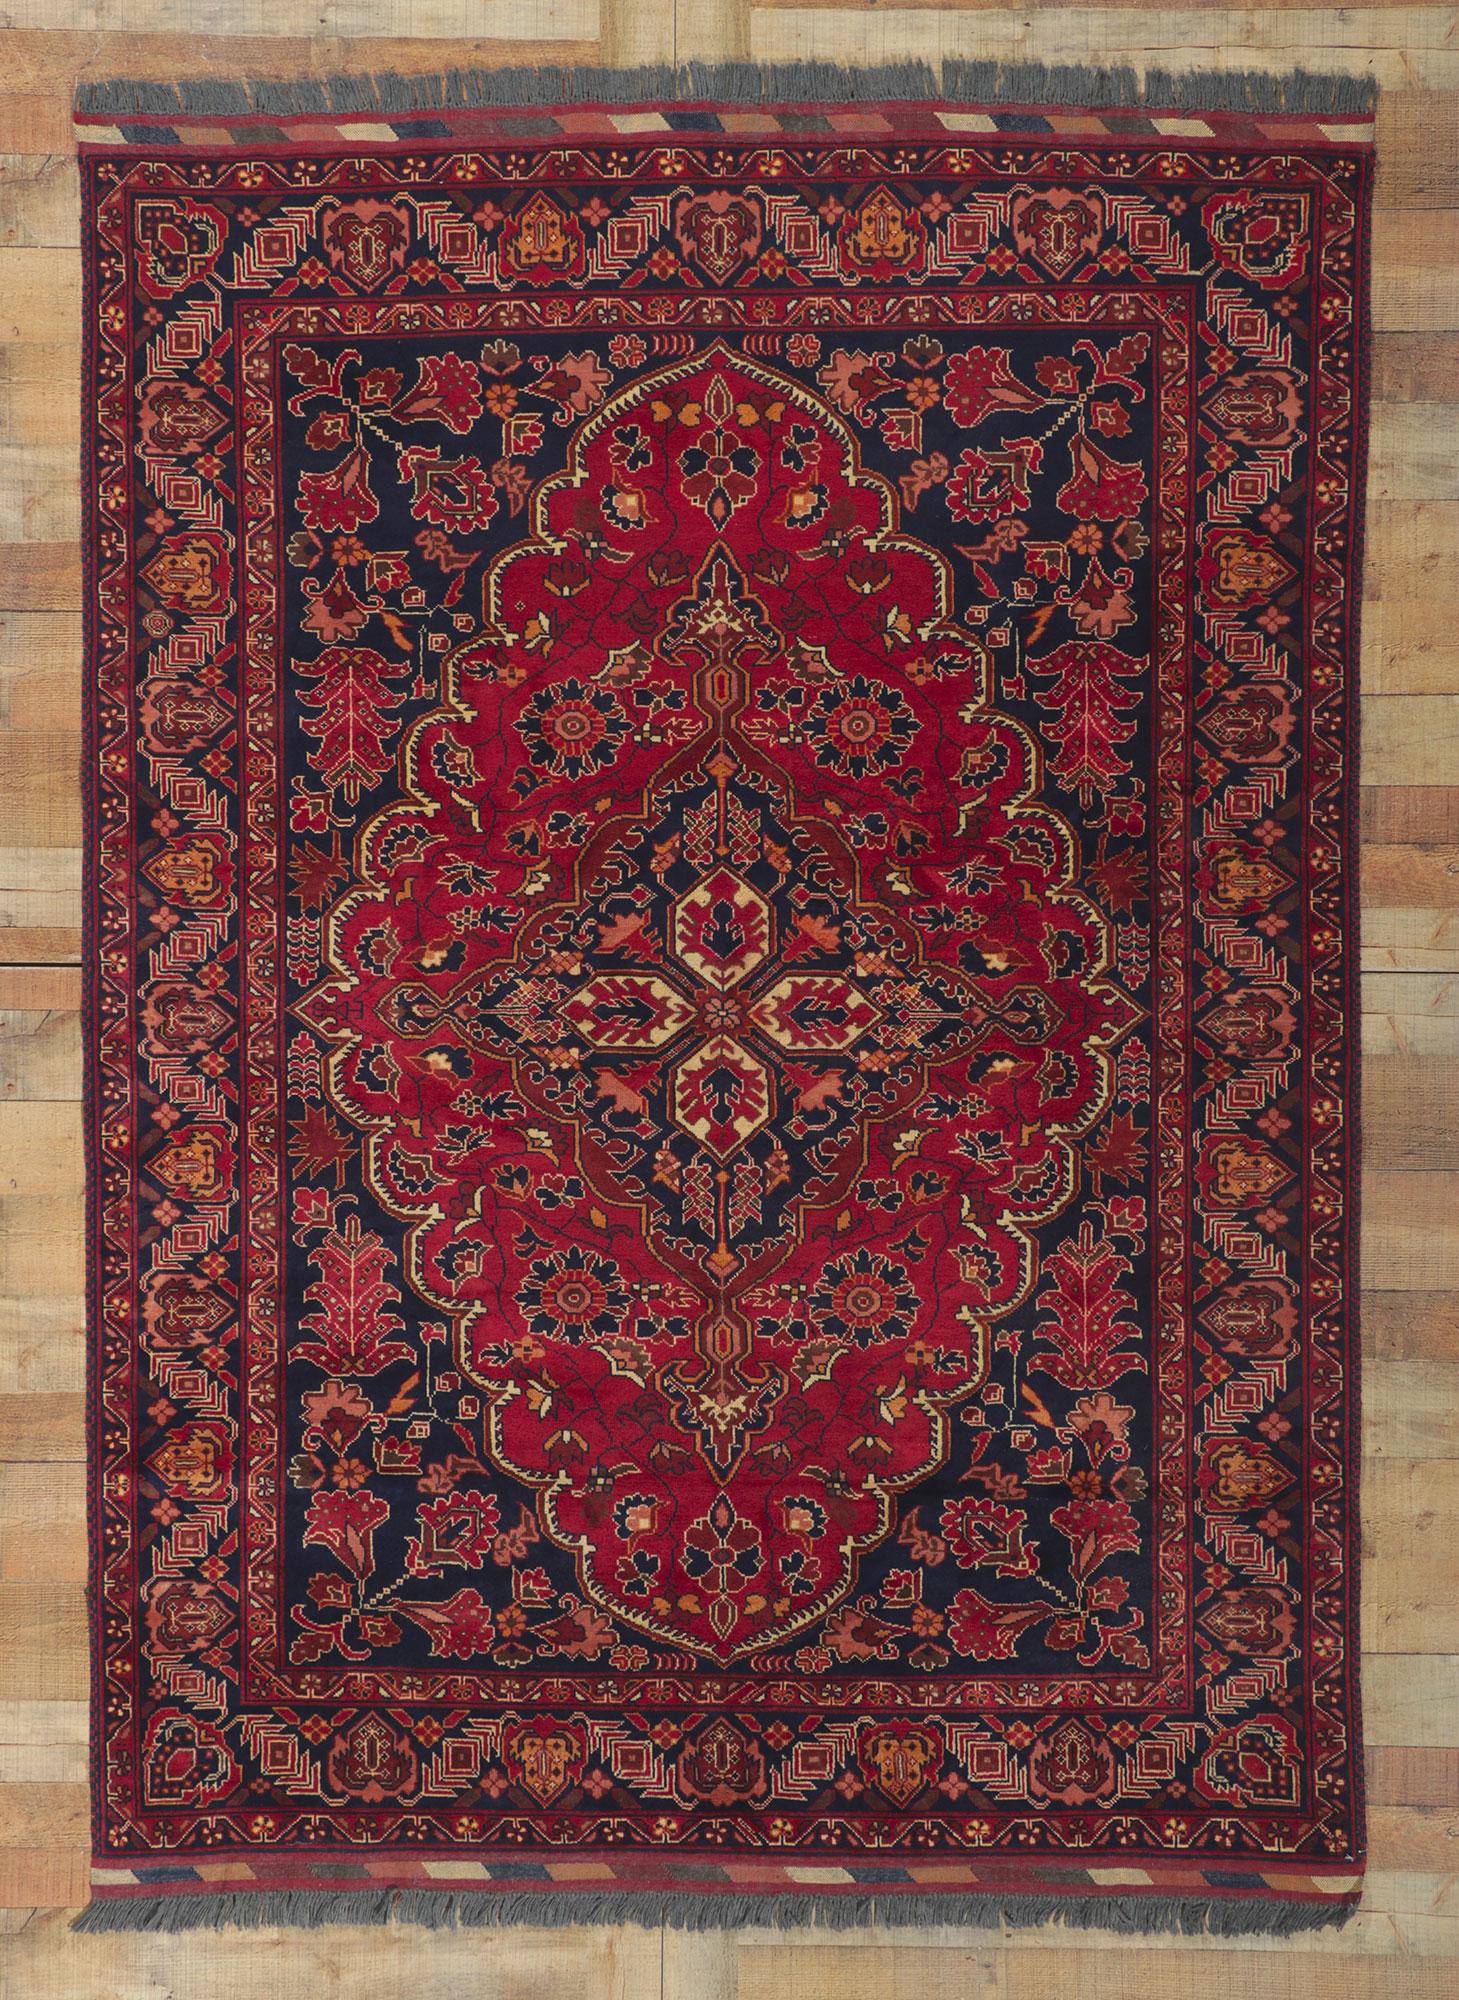 78344 Vintage Afghani Rug, 05'10 x 08'00.
Featuring a timeless elegance and regal charm, this exquisite hand-knotted wool vintage Afghani rug showcases a lozenge medallion, gracefully anchored with a trefoil pendant on either side. The captivating